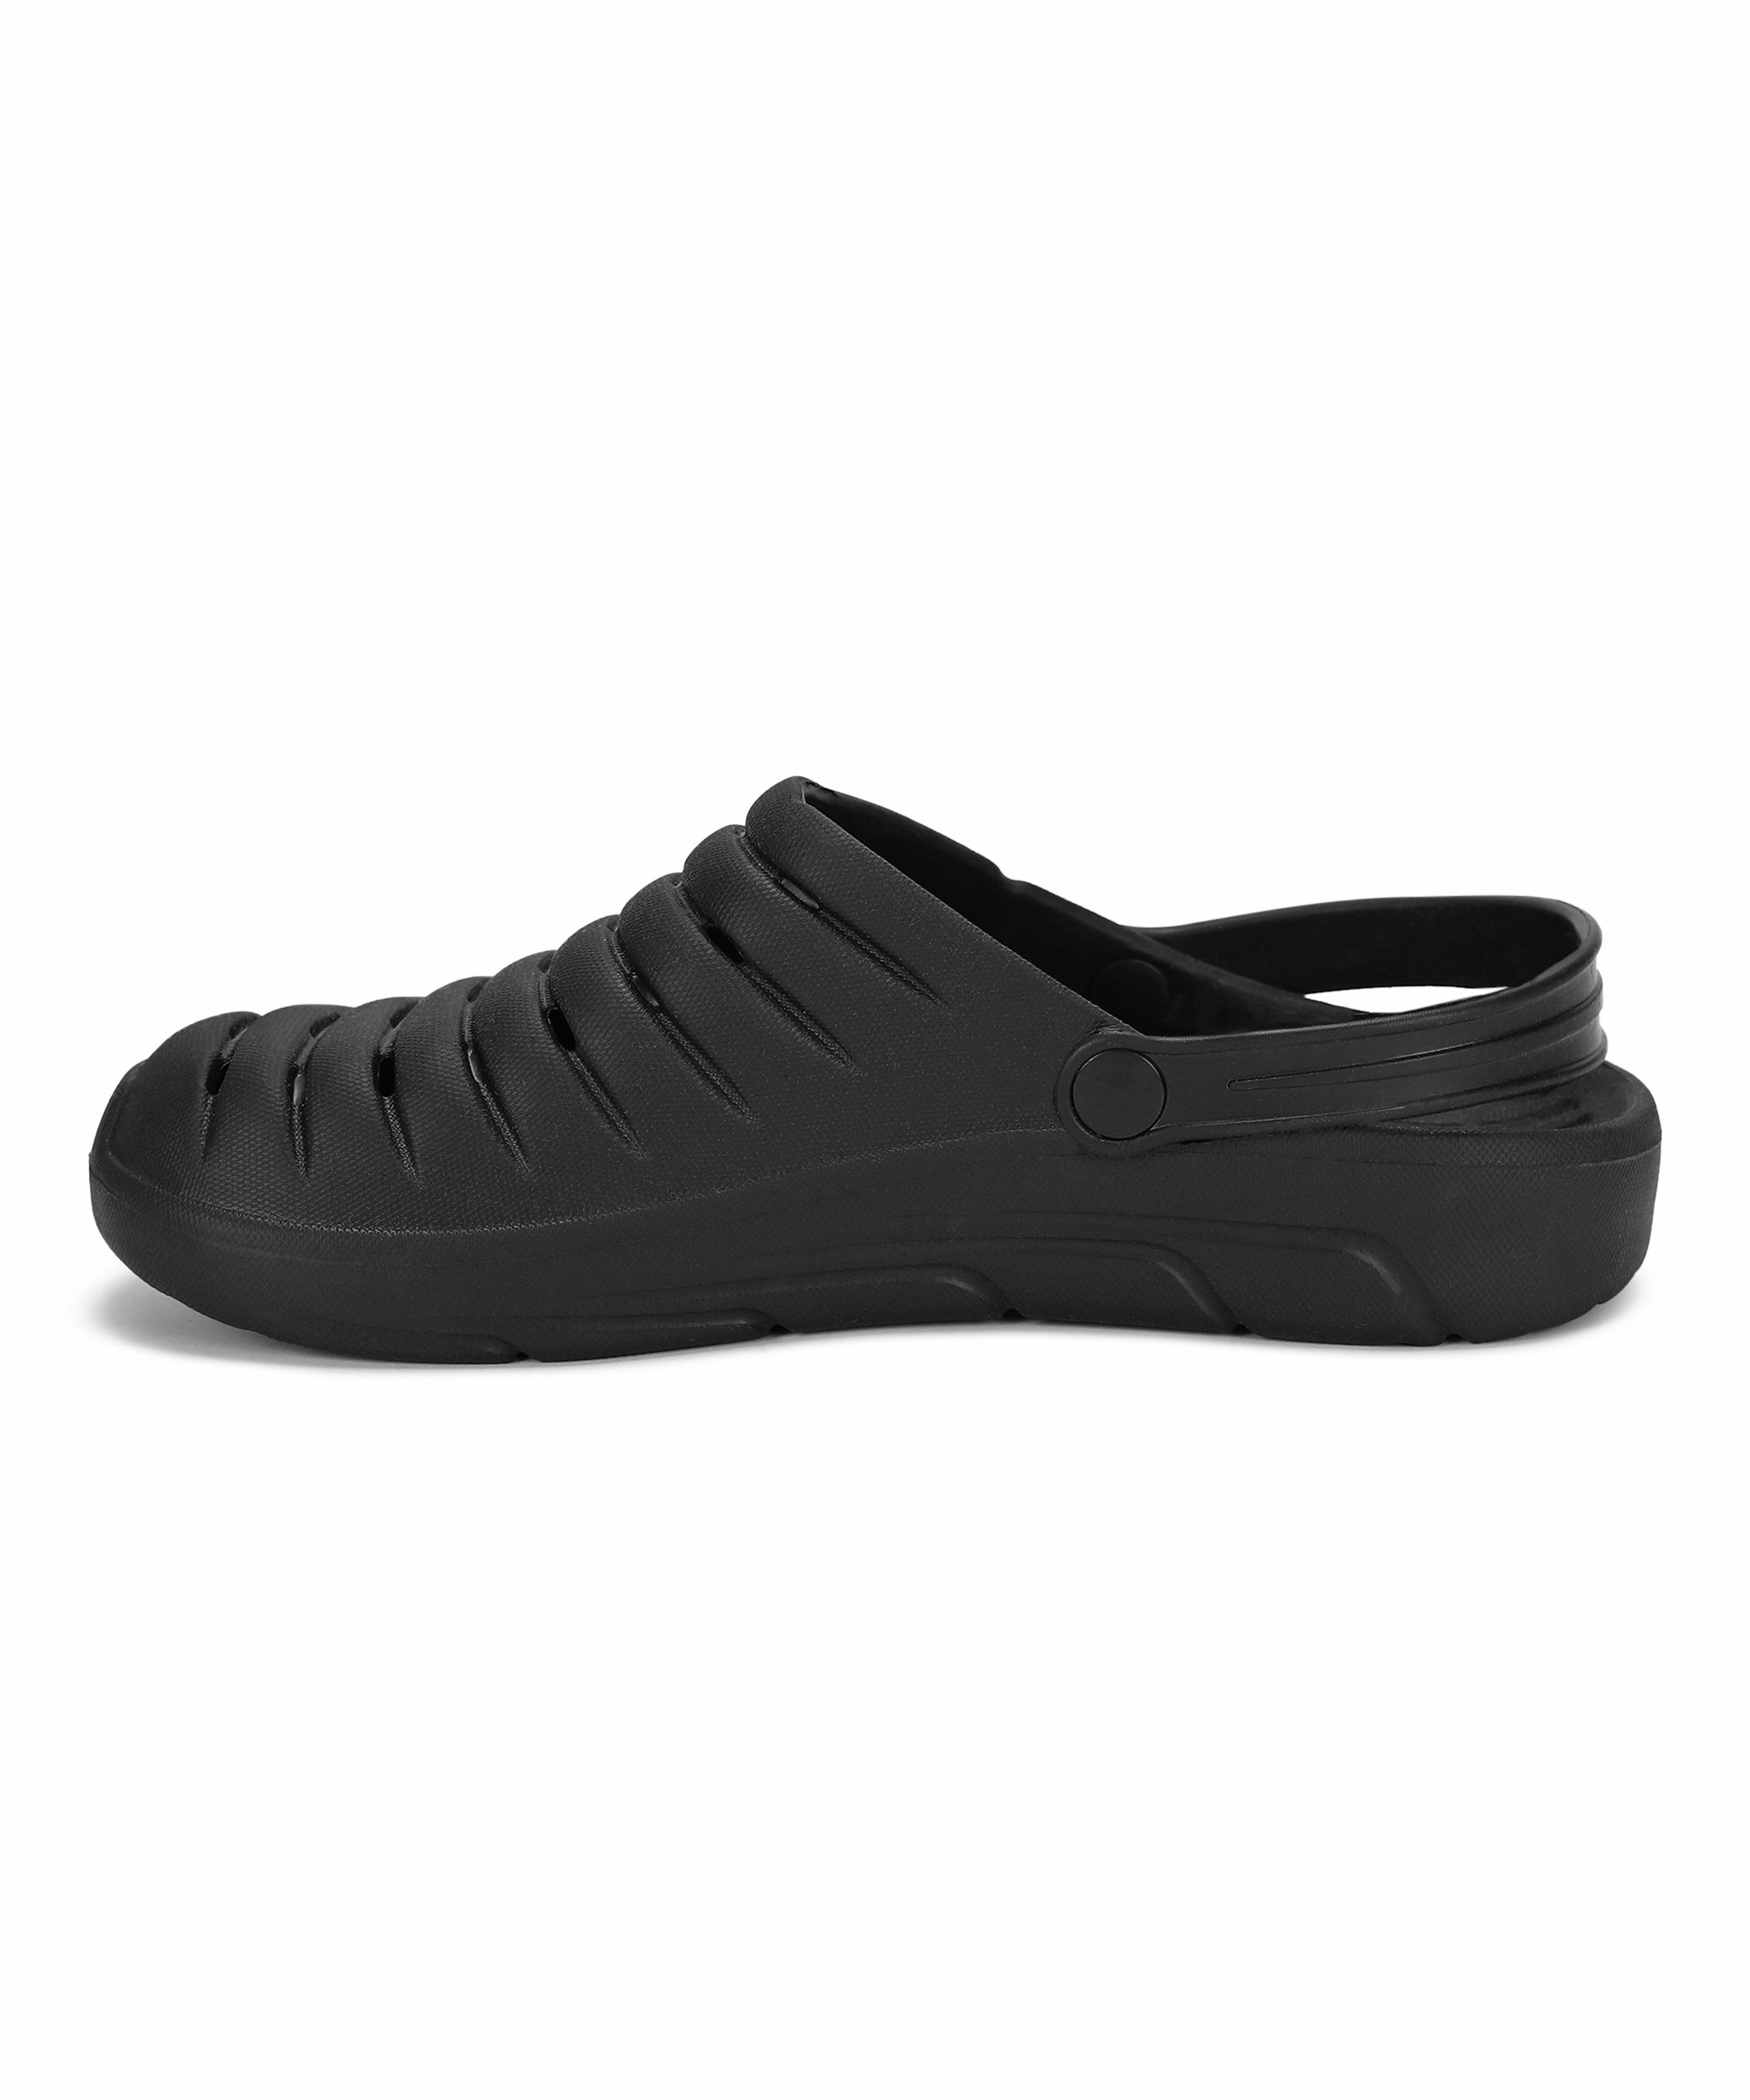 Paragon Blot K10911G Men Casual Clogs | Stylish, Anti-Skid, Durable | Casual &amp; Comfortable | For Everyday Use